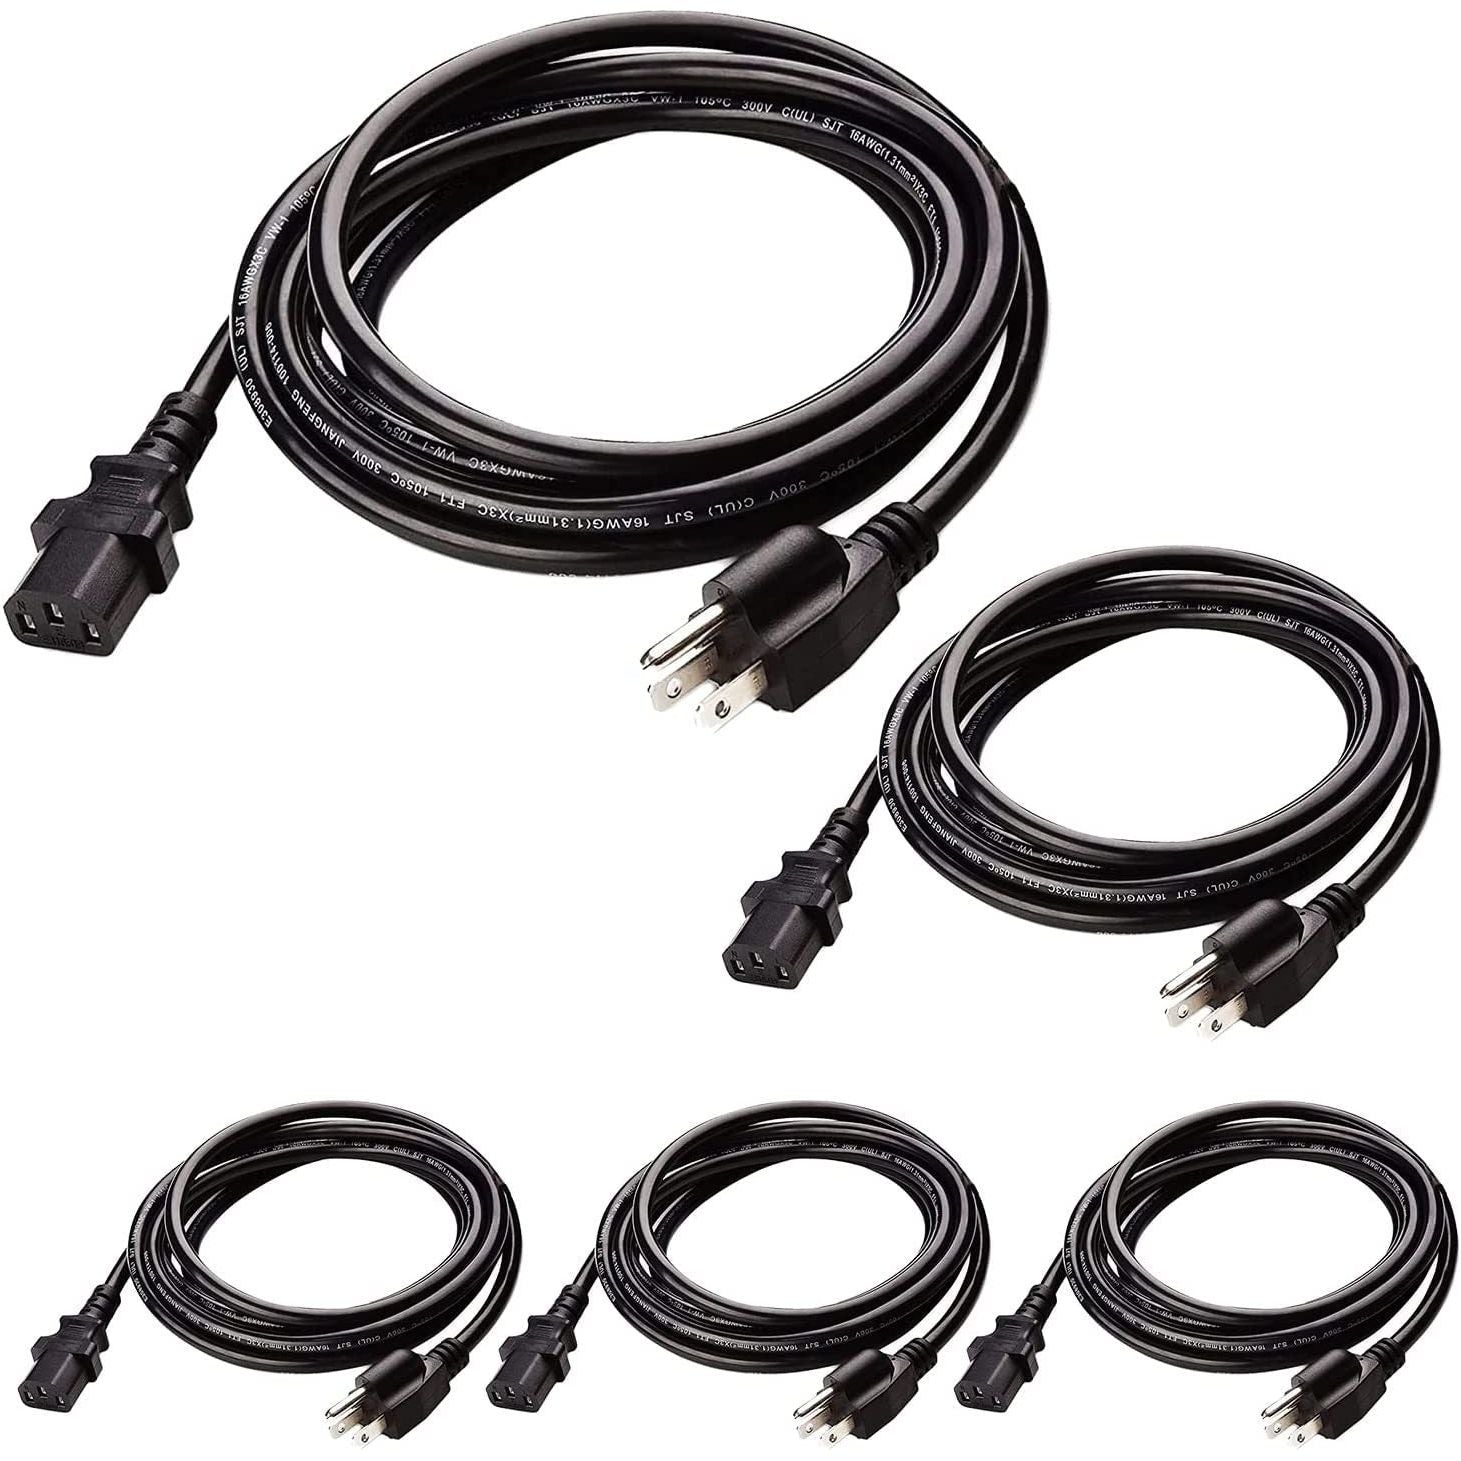 5Core Extra Long AC Wall Power Cord for Led TV Vizio Samsung 12 Feet 3 Prong PC 1002